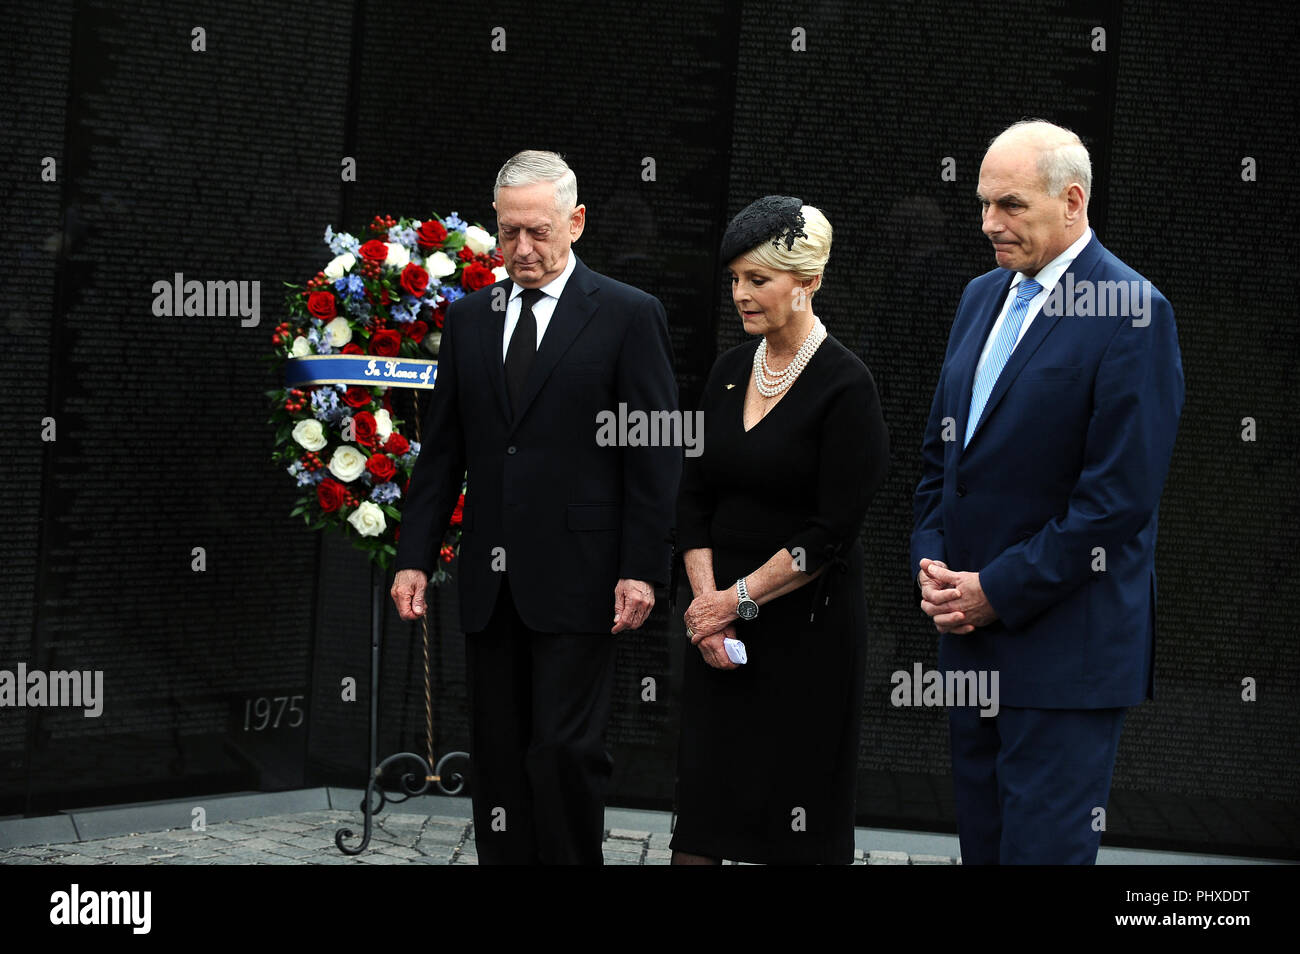 Washington, District of Columbia, USA. 1st Sep, 2018. U.S. Secretary of Defense James Mattis, General John Kelly, White House Chief of Staff and Cindy McCain, wife of late Senator John McCain, lay a ceremonial wreath honoring all whose lives were lost during the Vietnam War at at the Vietnam Veterans Memorial in Washington, U.S., September 1, 2018. Credit: Mary F. Calvert/Pool via CNP Credit: Mary F. Calvert/CNP/ZUMA Wire/Alamy Live News Stock Photo